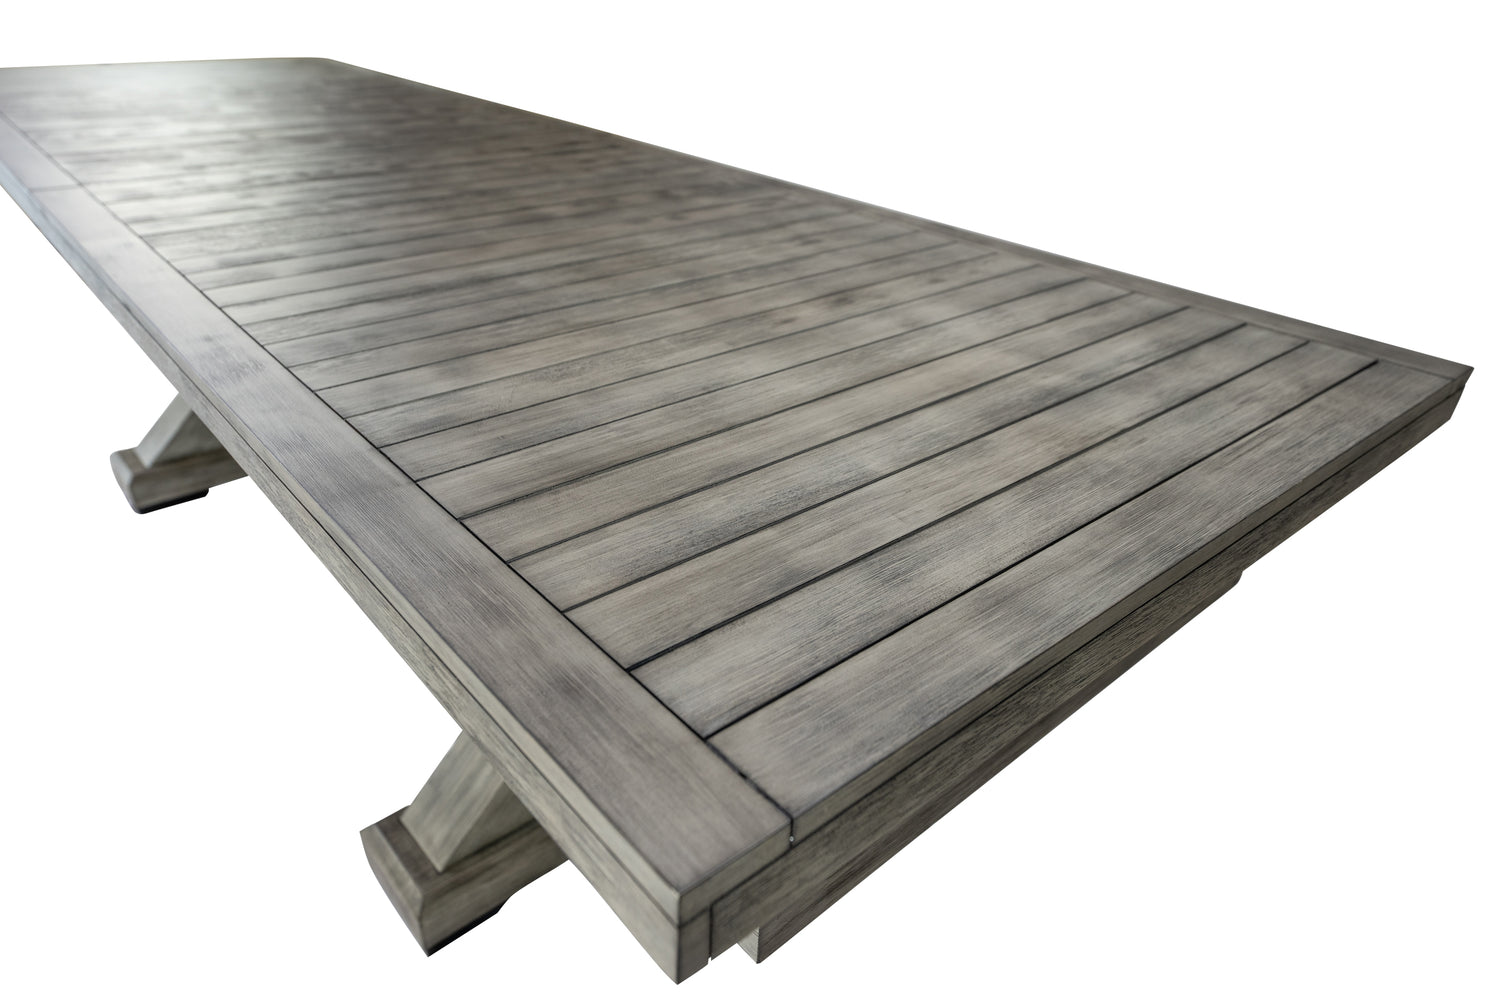 Legacy Billiards 9 Foot Shuffleboard Outdoor Dining Top in Ash Grey Finish - Angle View